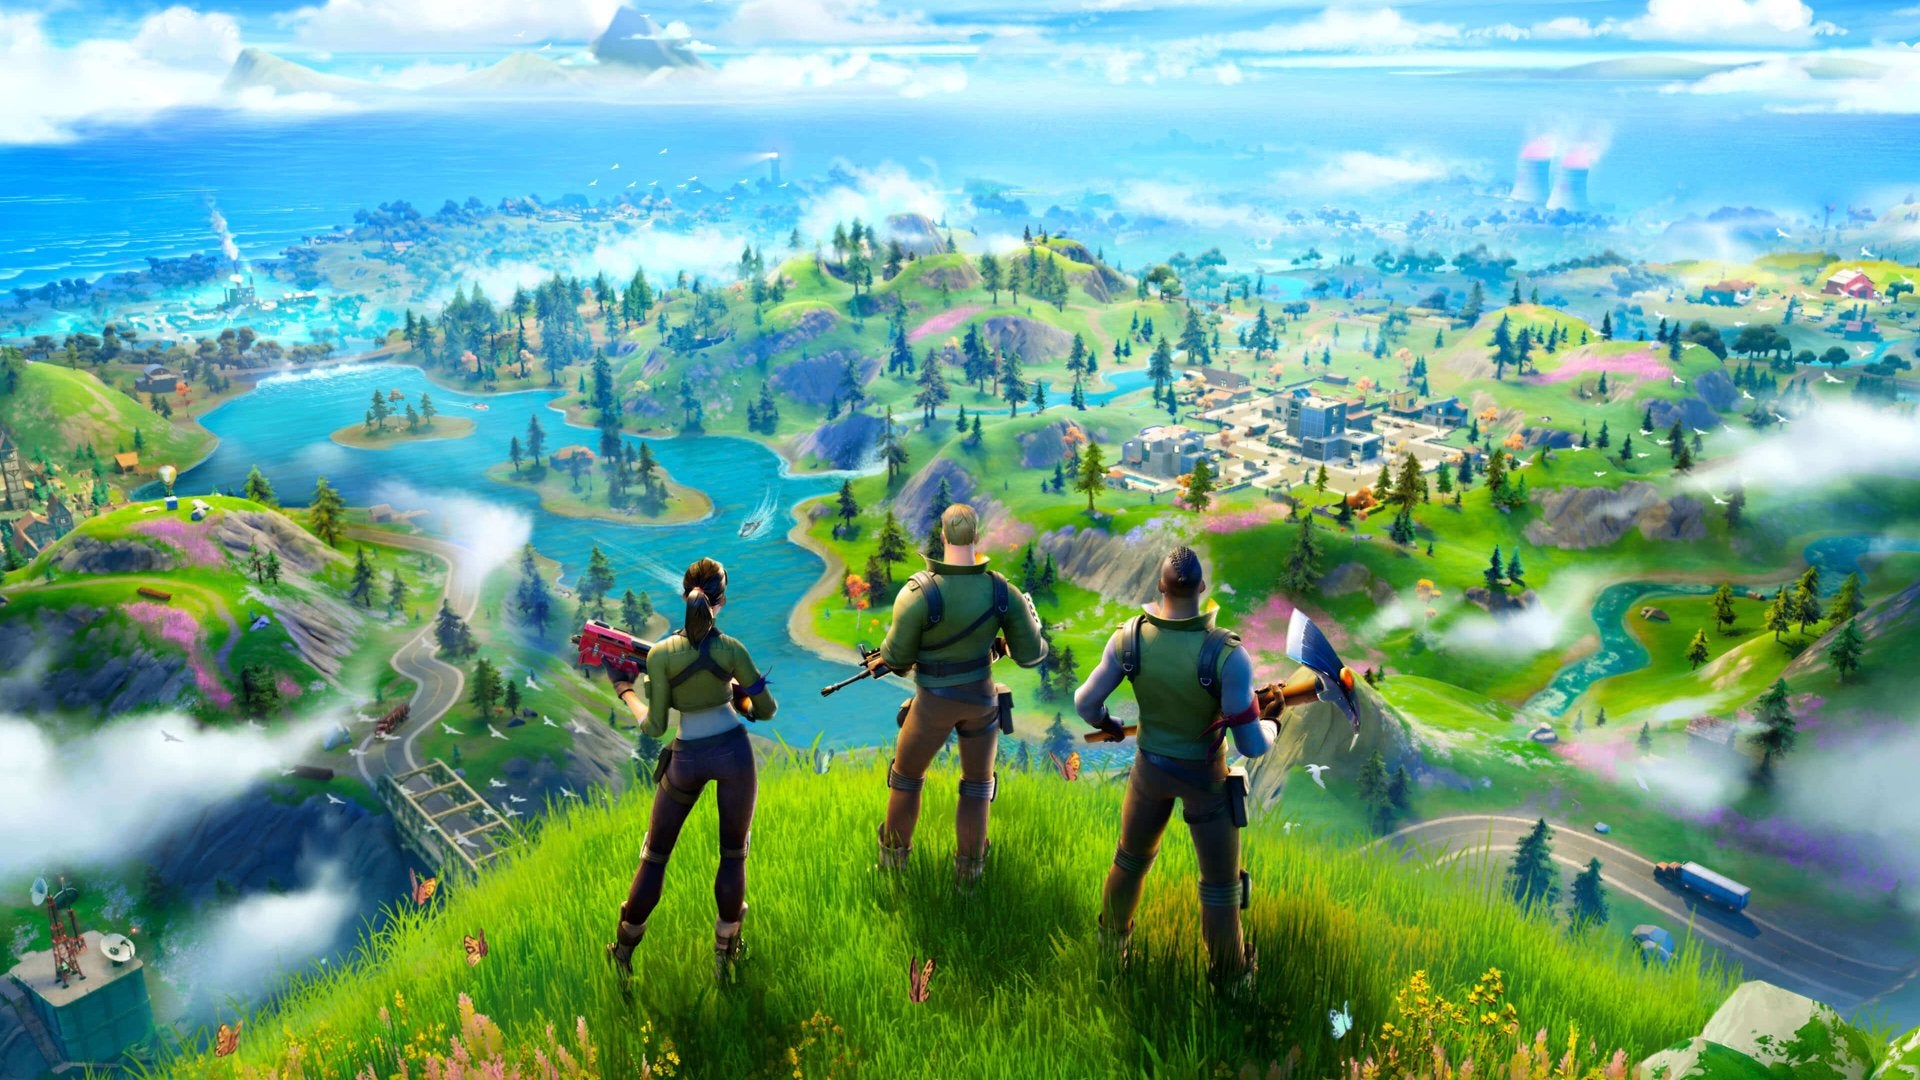 Image for Epic are asking US court to prevent Apple from removing Fortnite and Unreal Engine access